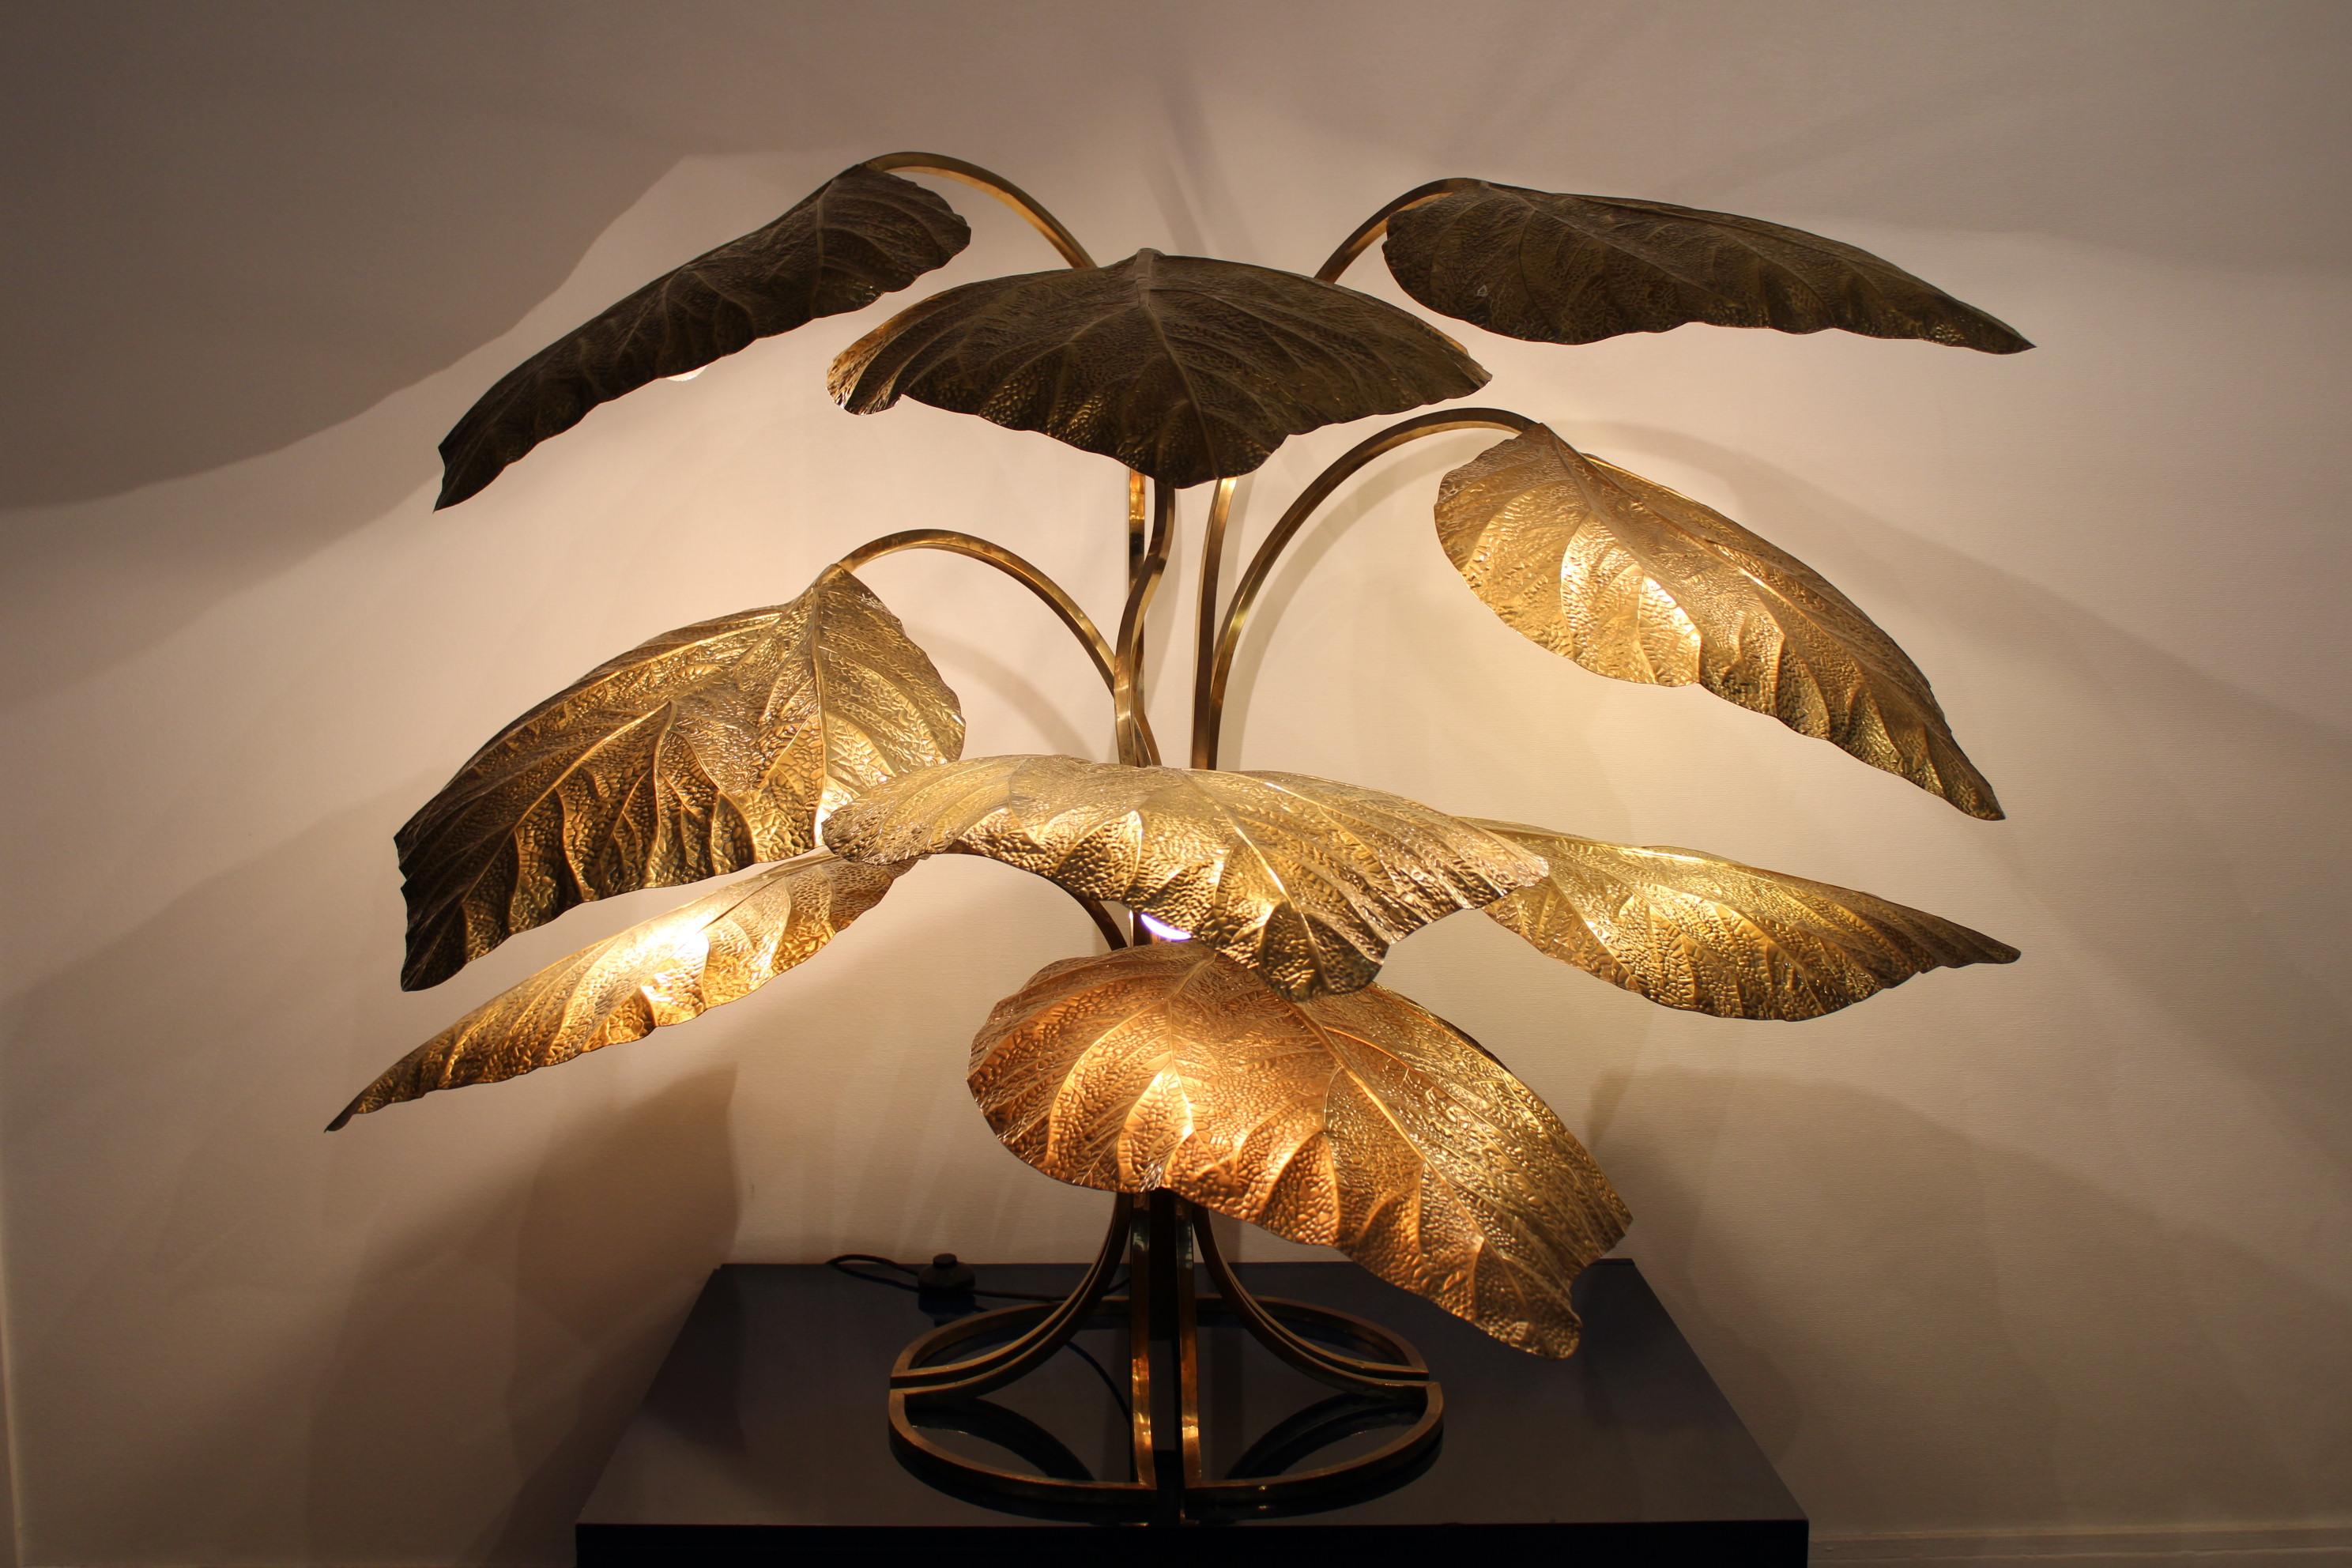 Rhubarb lamp sculpture by Carlo Giorgi for the decorator Tommaso Barbi
Italy, circa 970
polished brass.